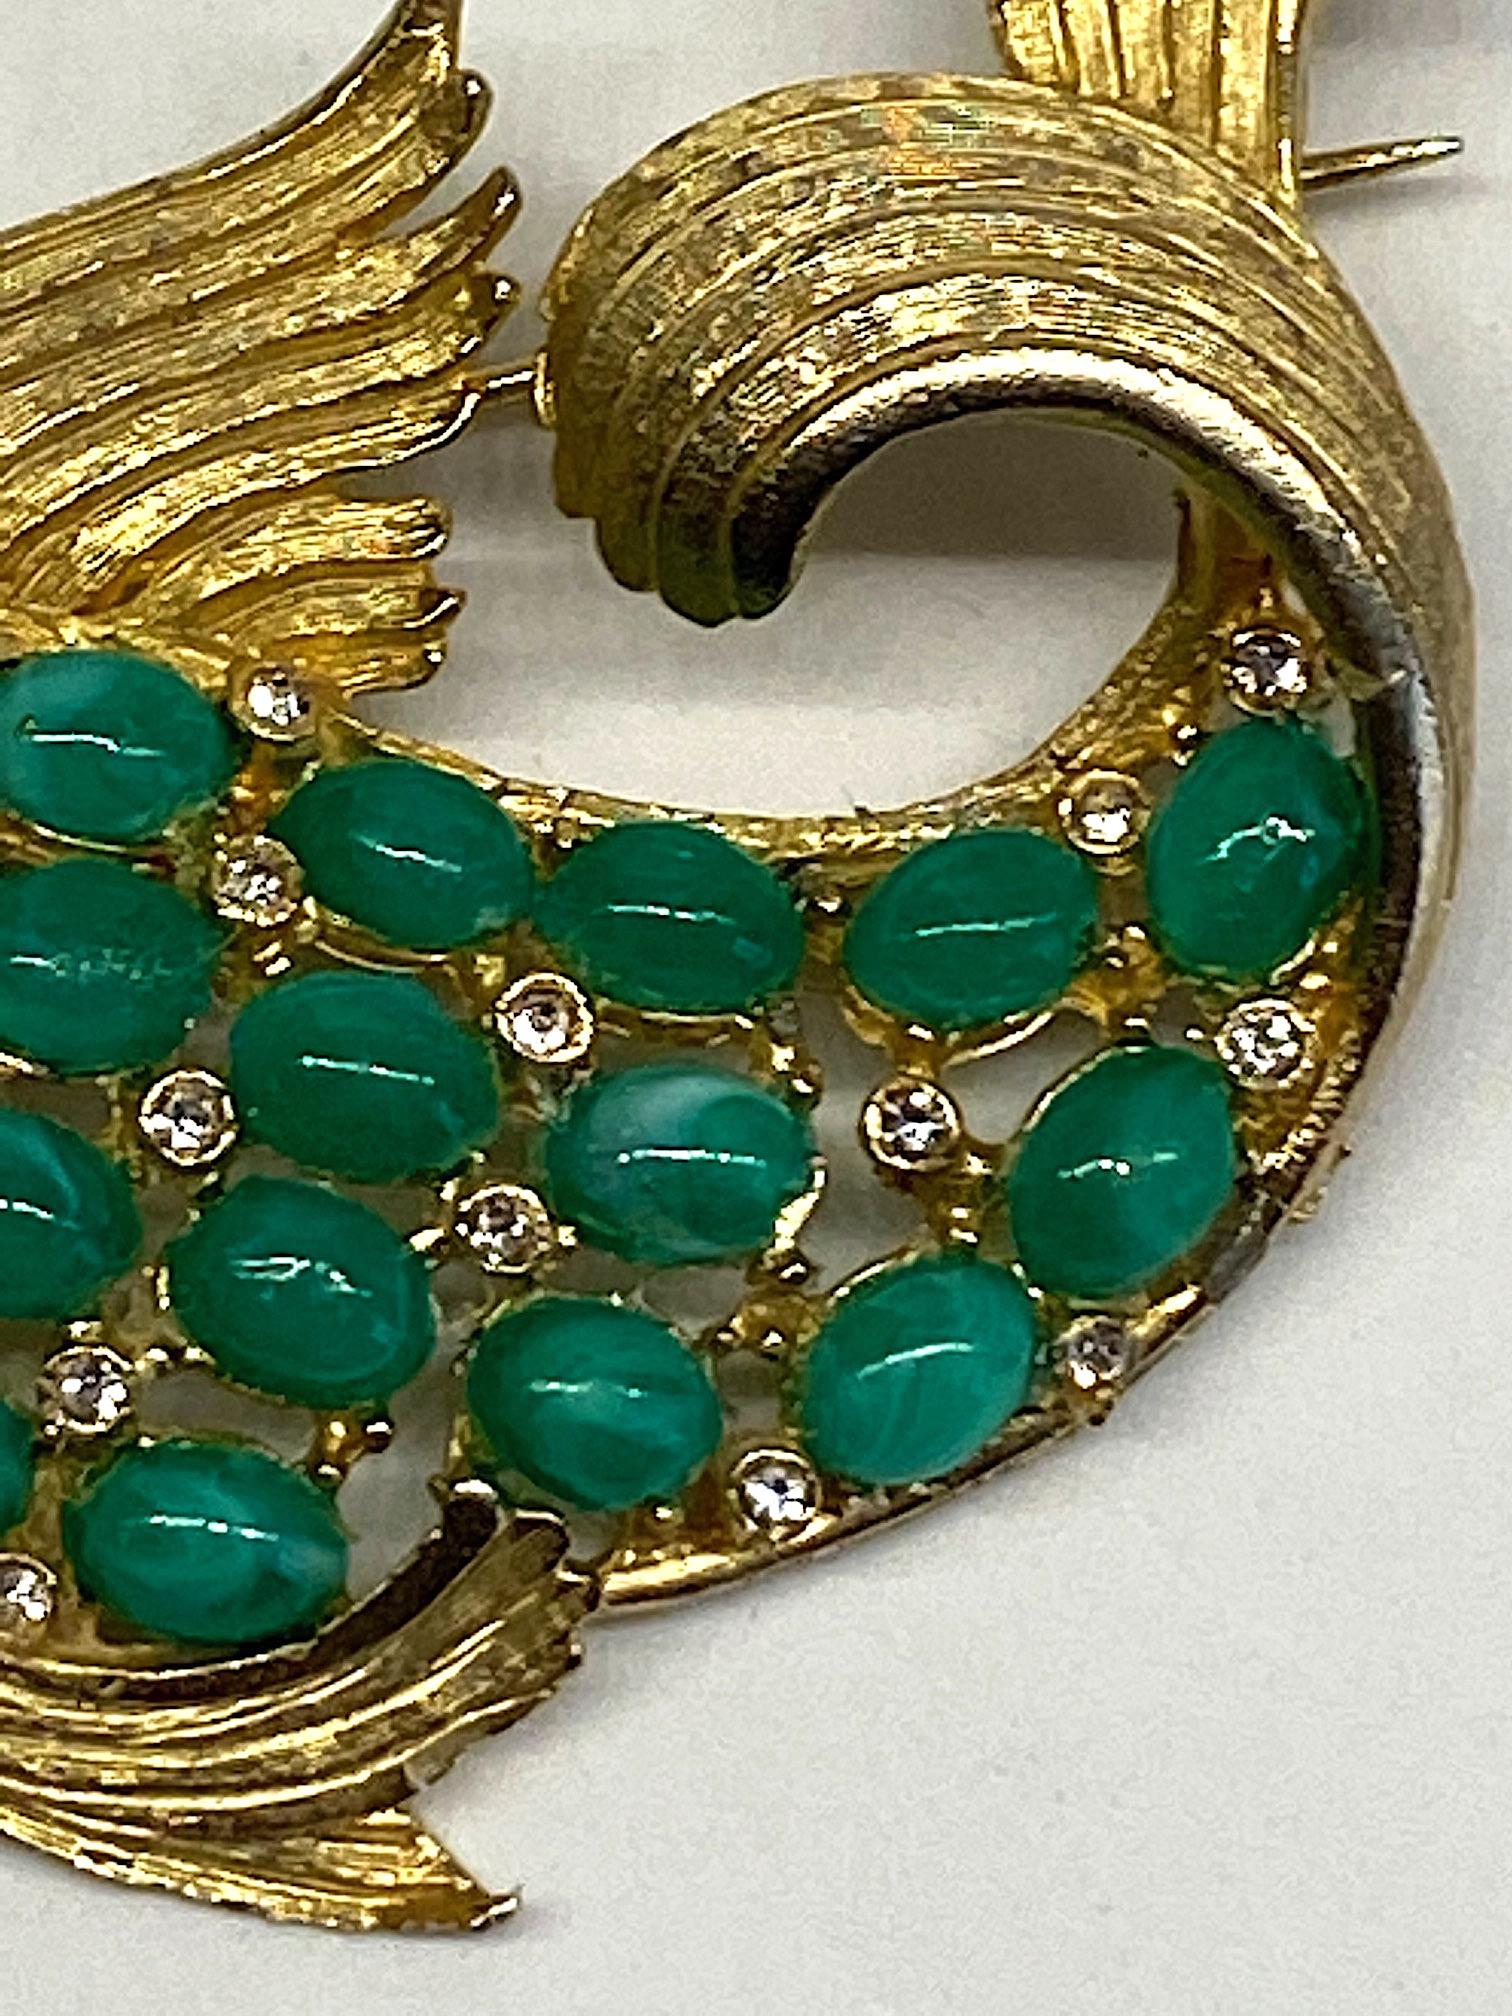 1950s Satin Gold Figural Brooch of Fish with Green Cabochon 5